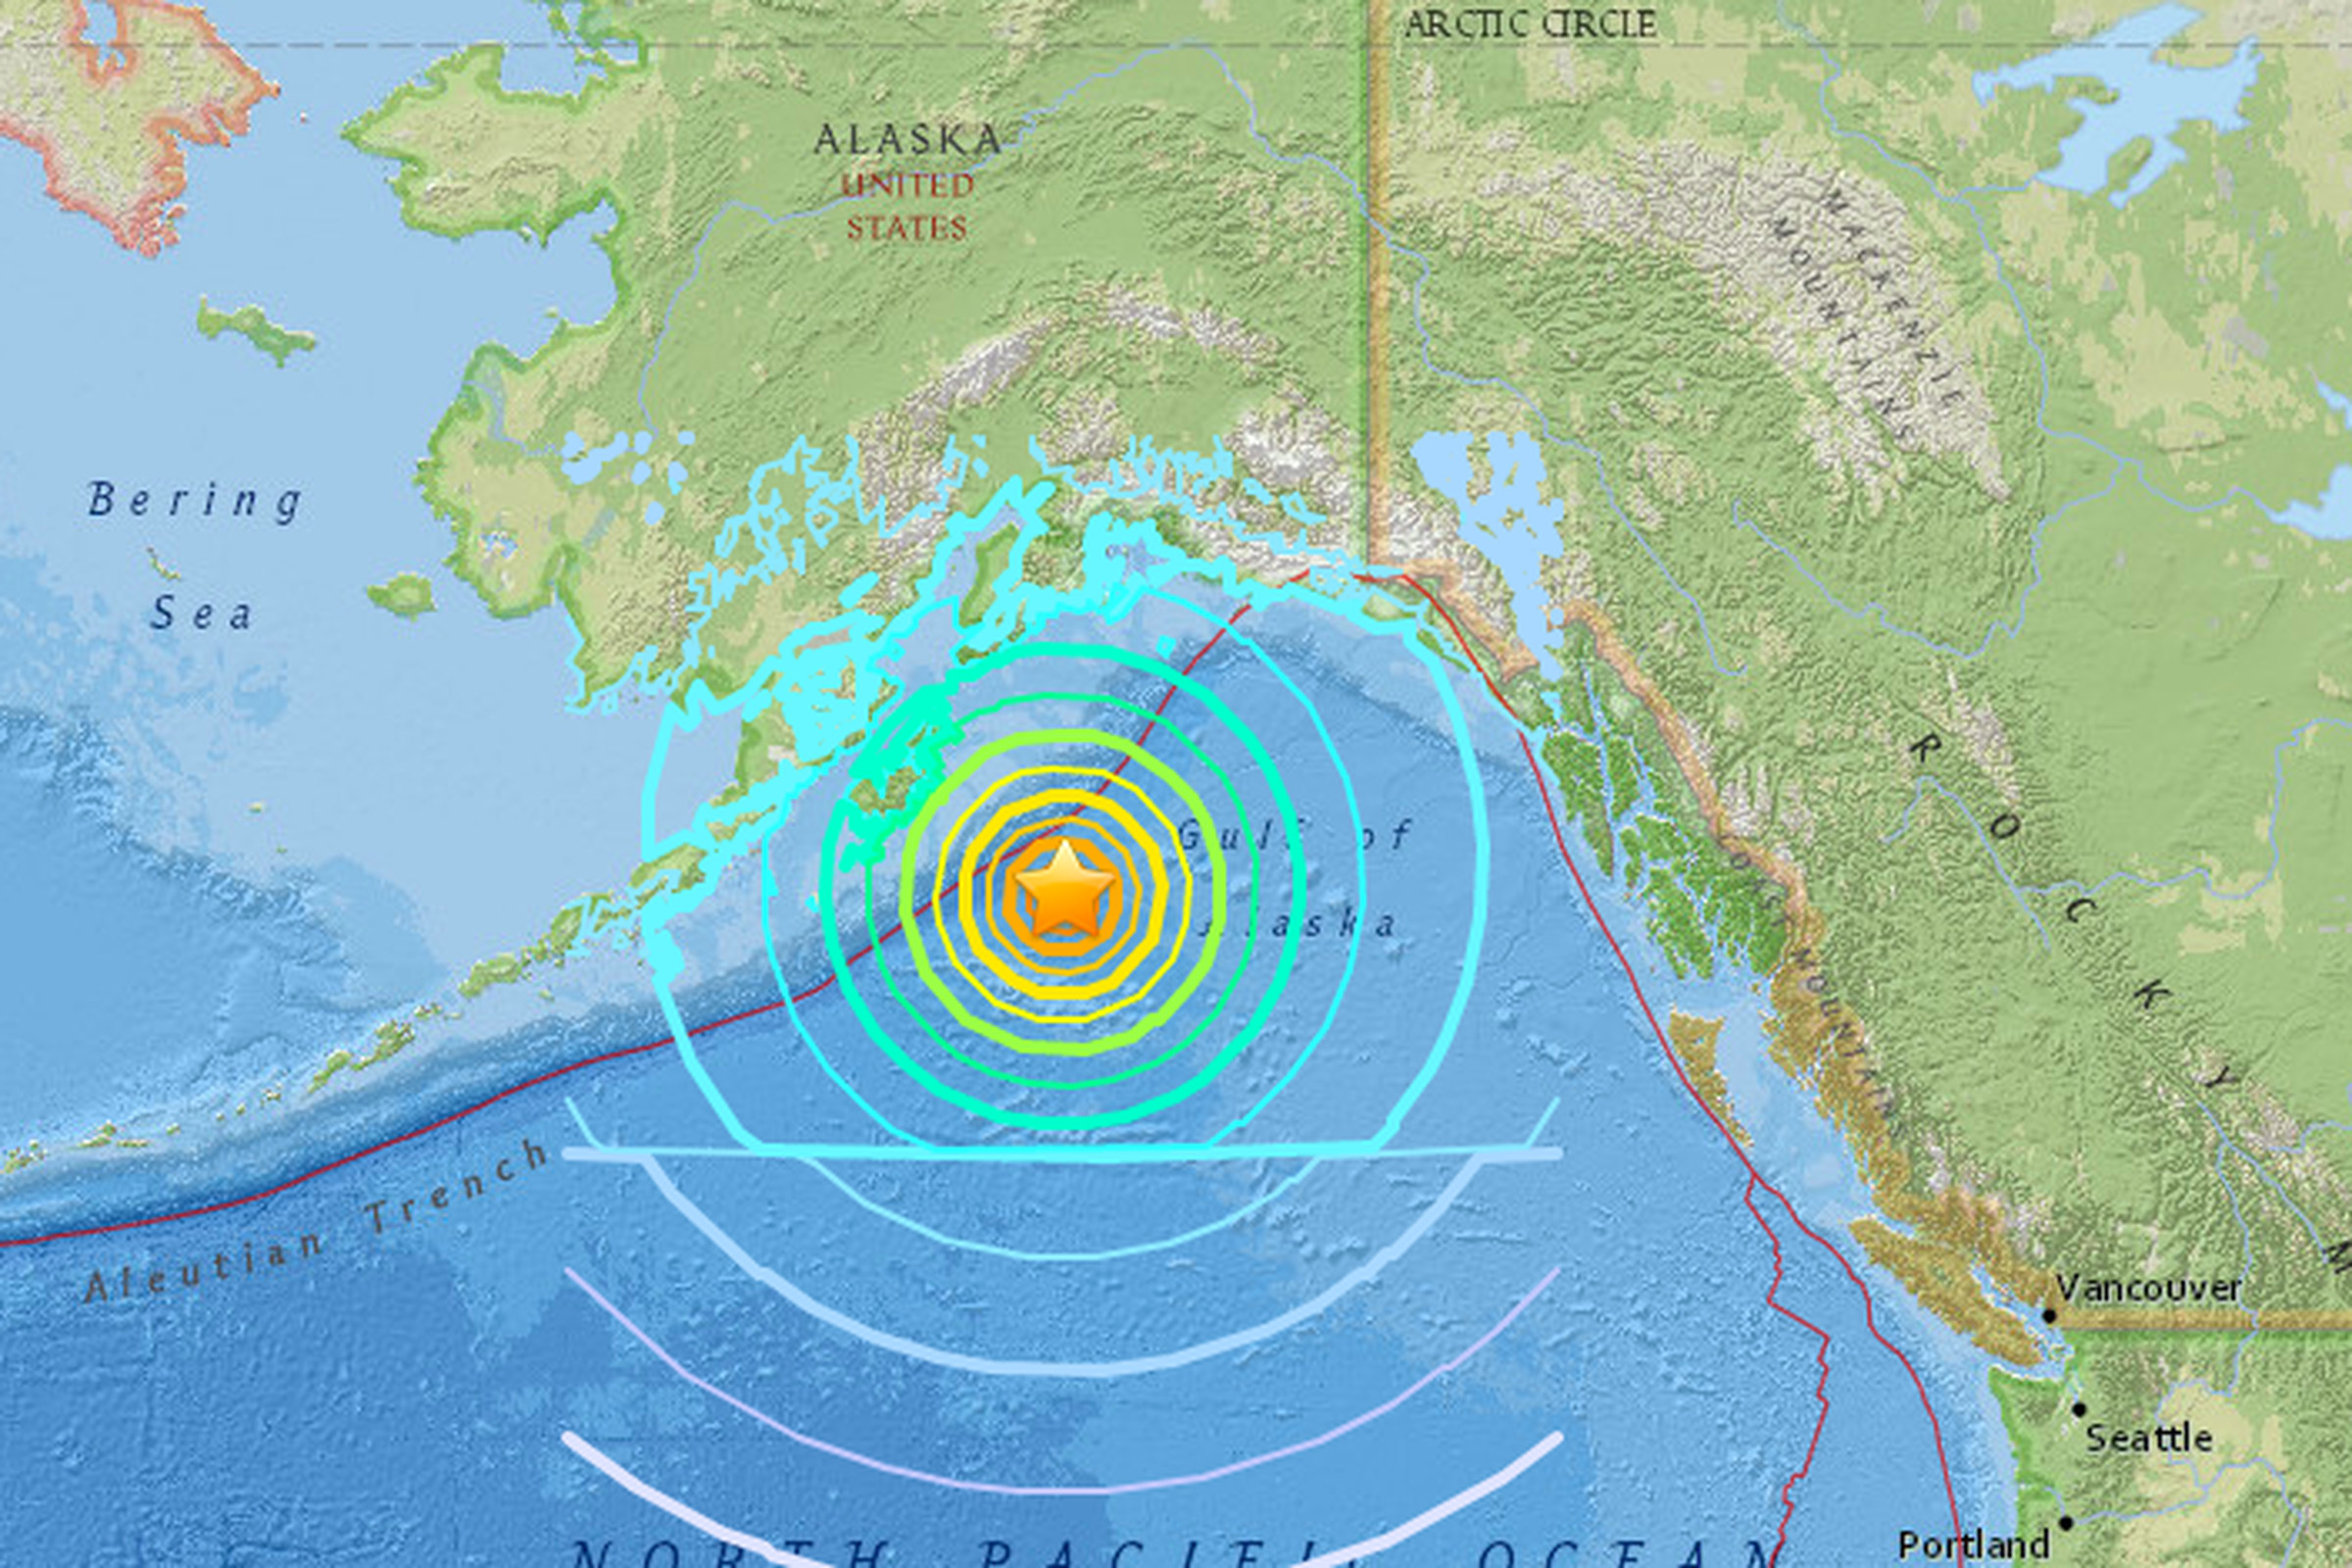 A map showing the location of last night’s magnitude 7.9 earthquake in the Gulf of Alaska.